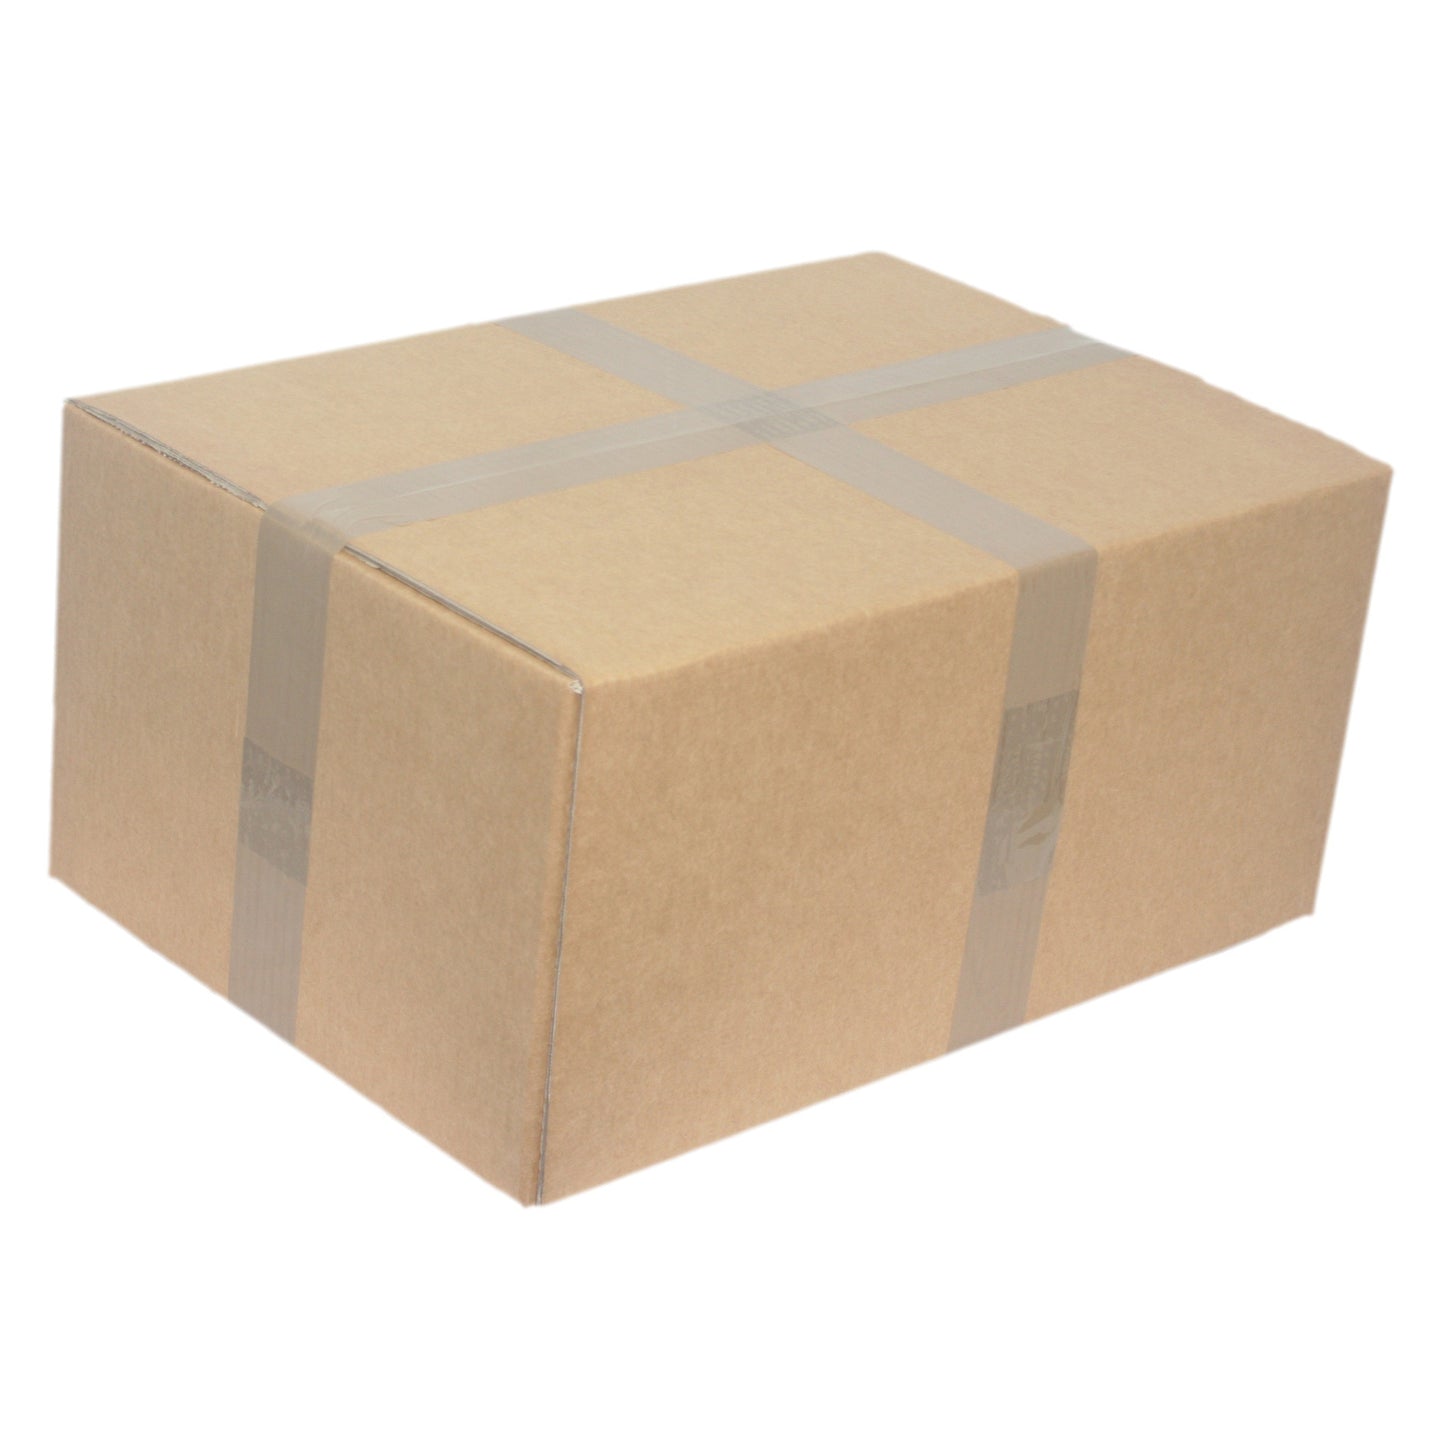 Fitted Hamper Shipping Carton